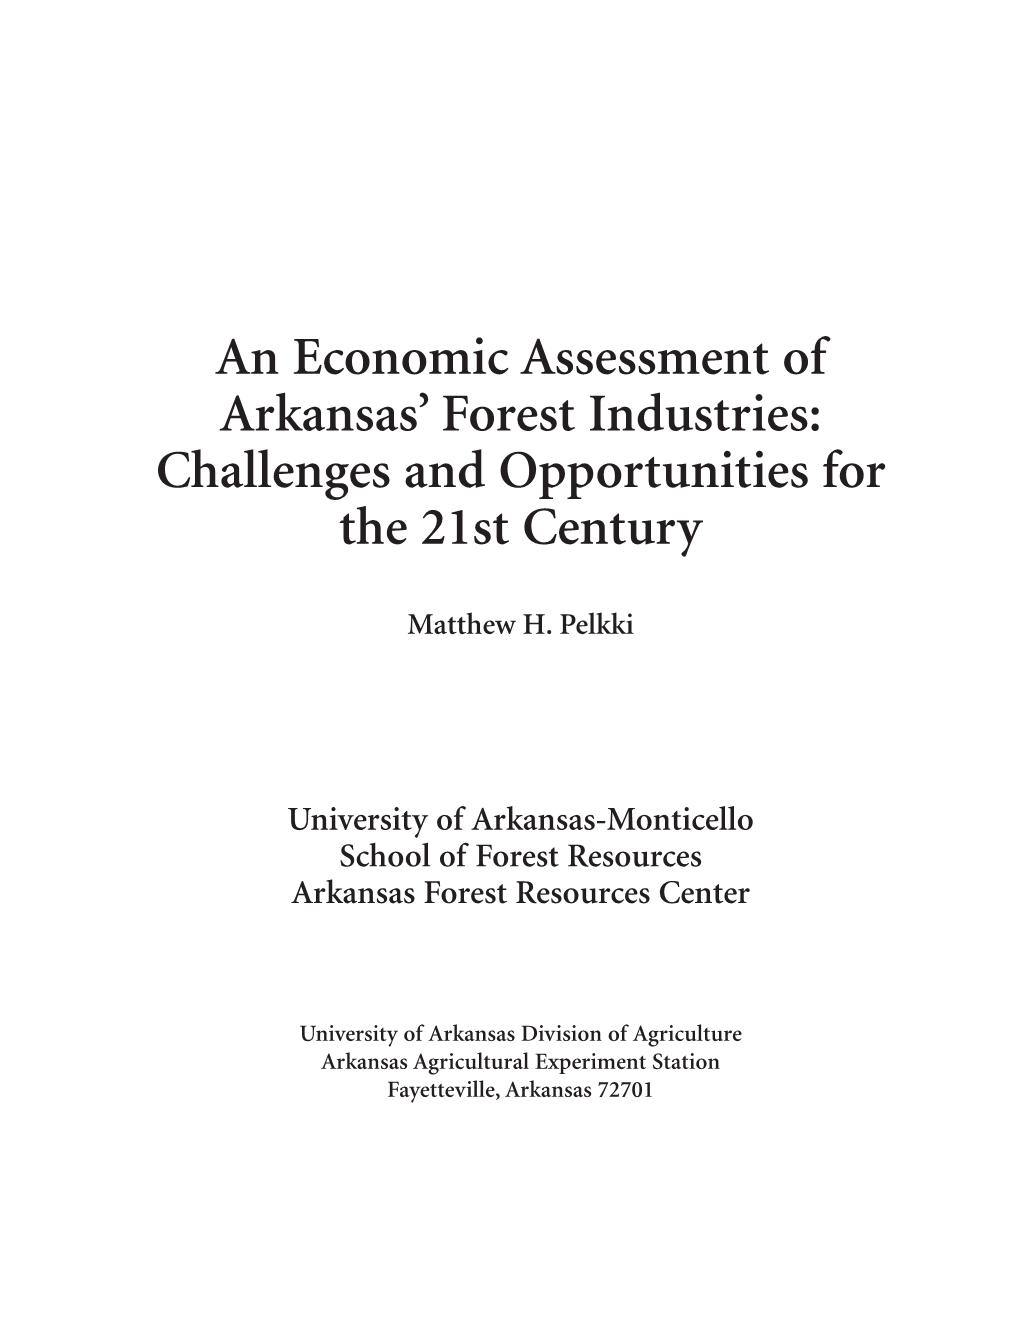 An Economic Assessment of Arkansas' Forest Industries: Challenges And